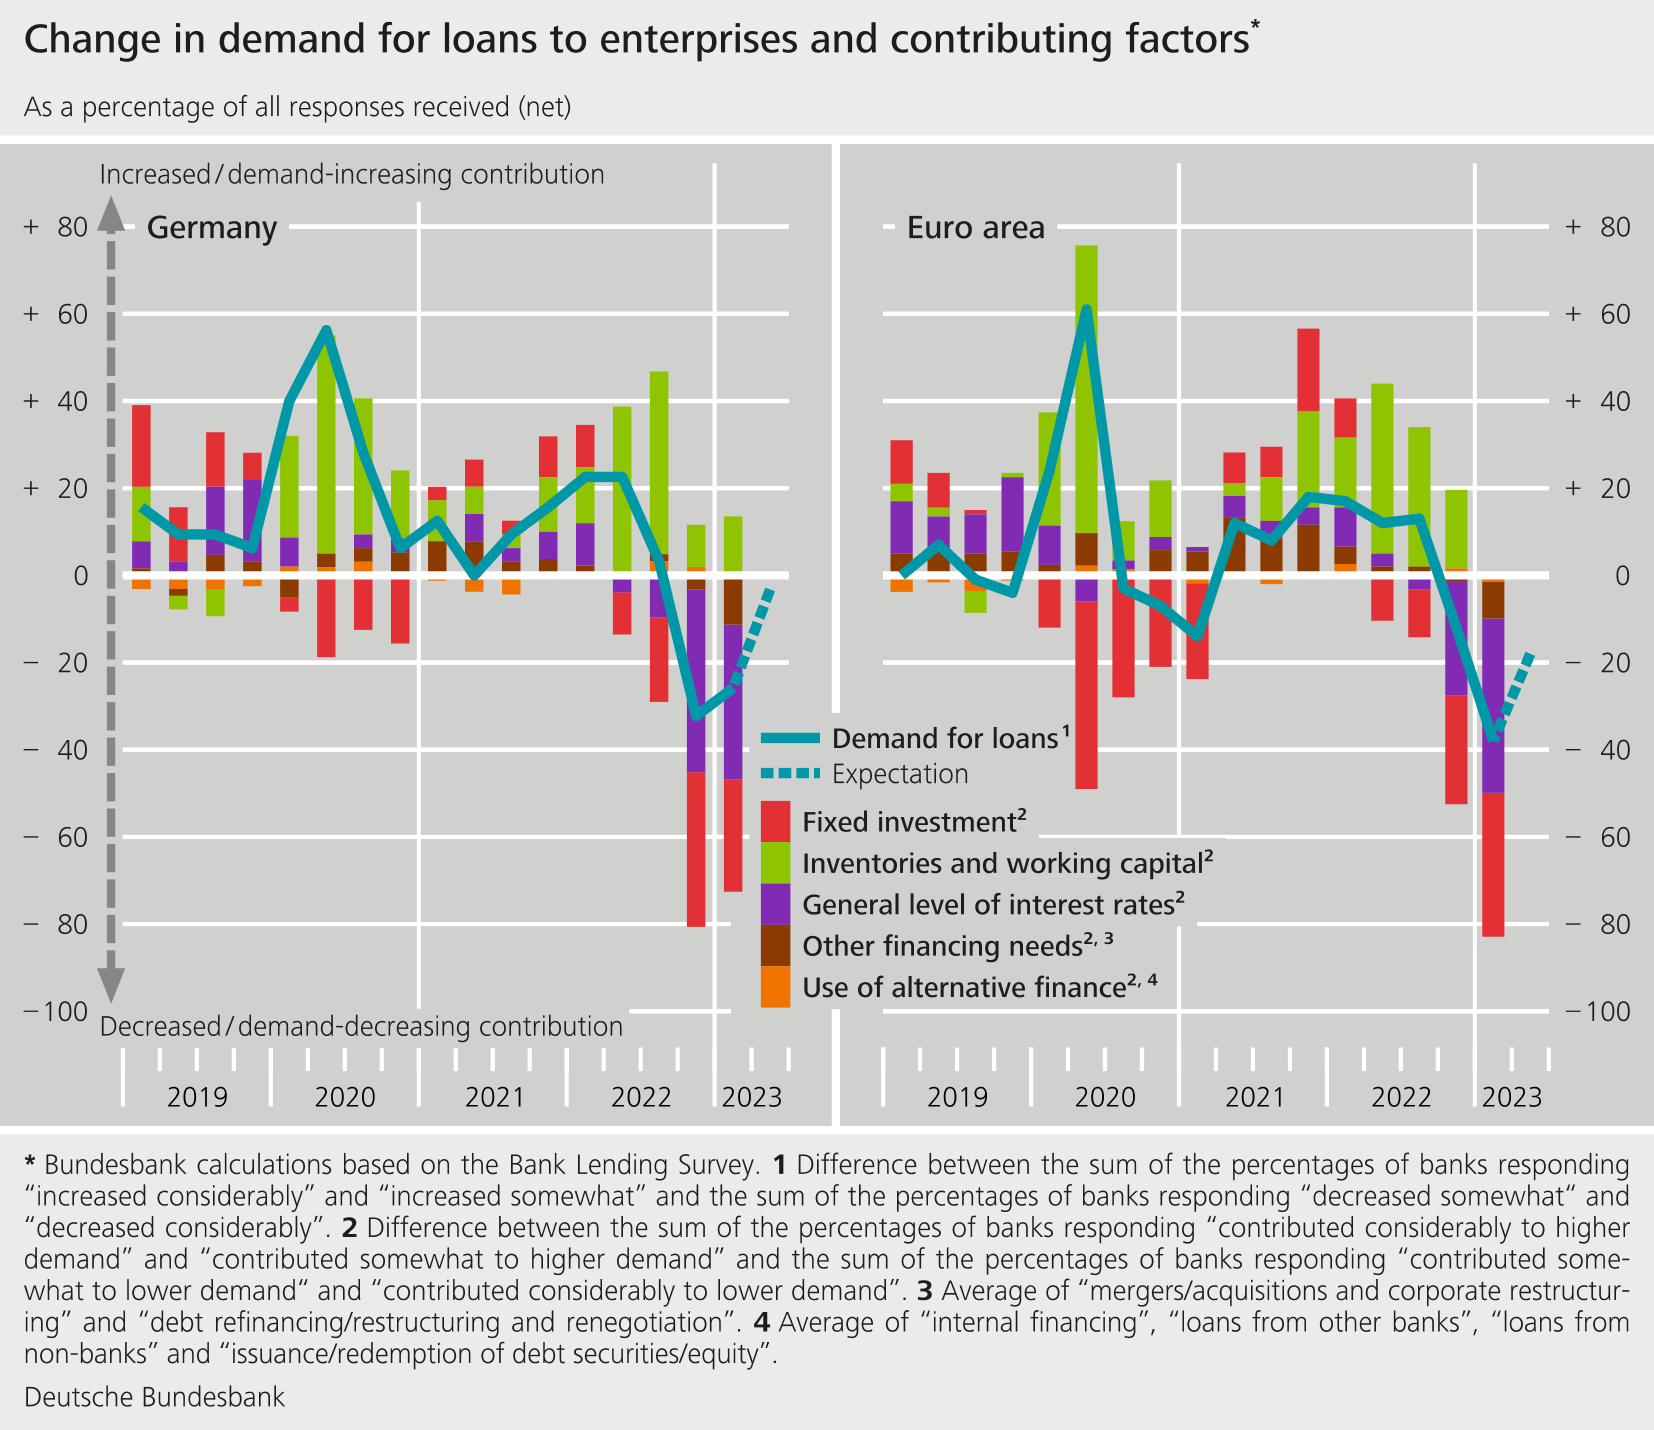 Change in demand for loans to enterprises and contributing factors